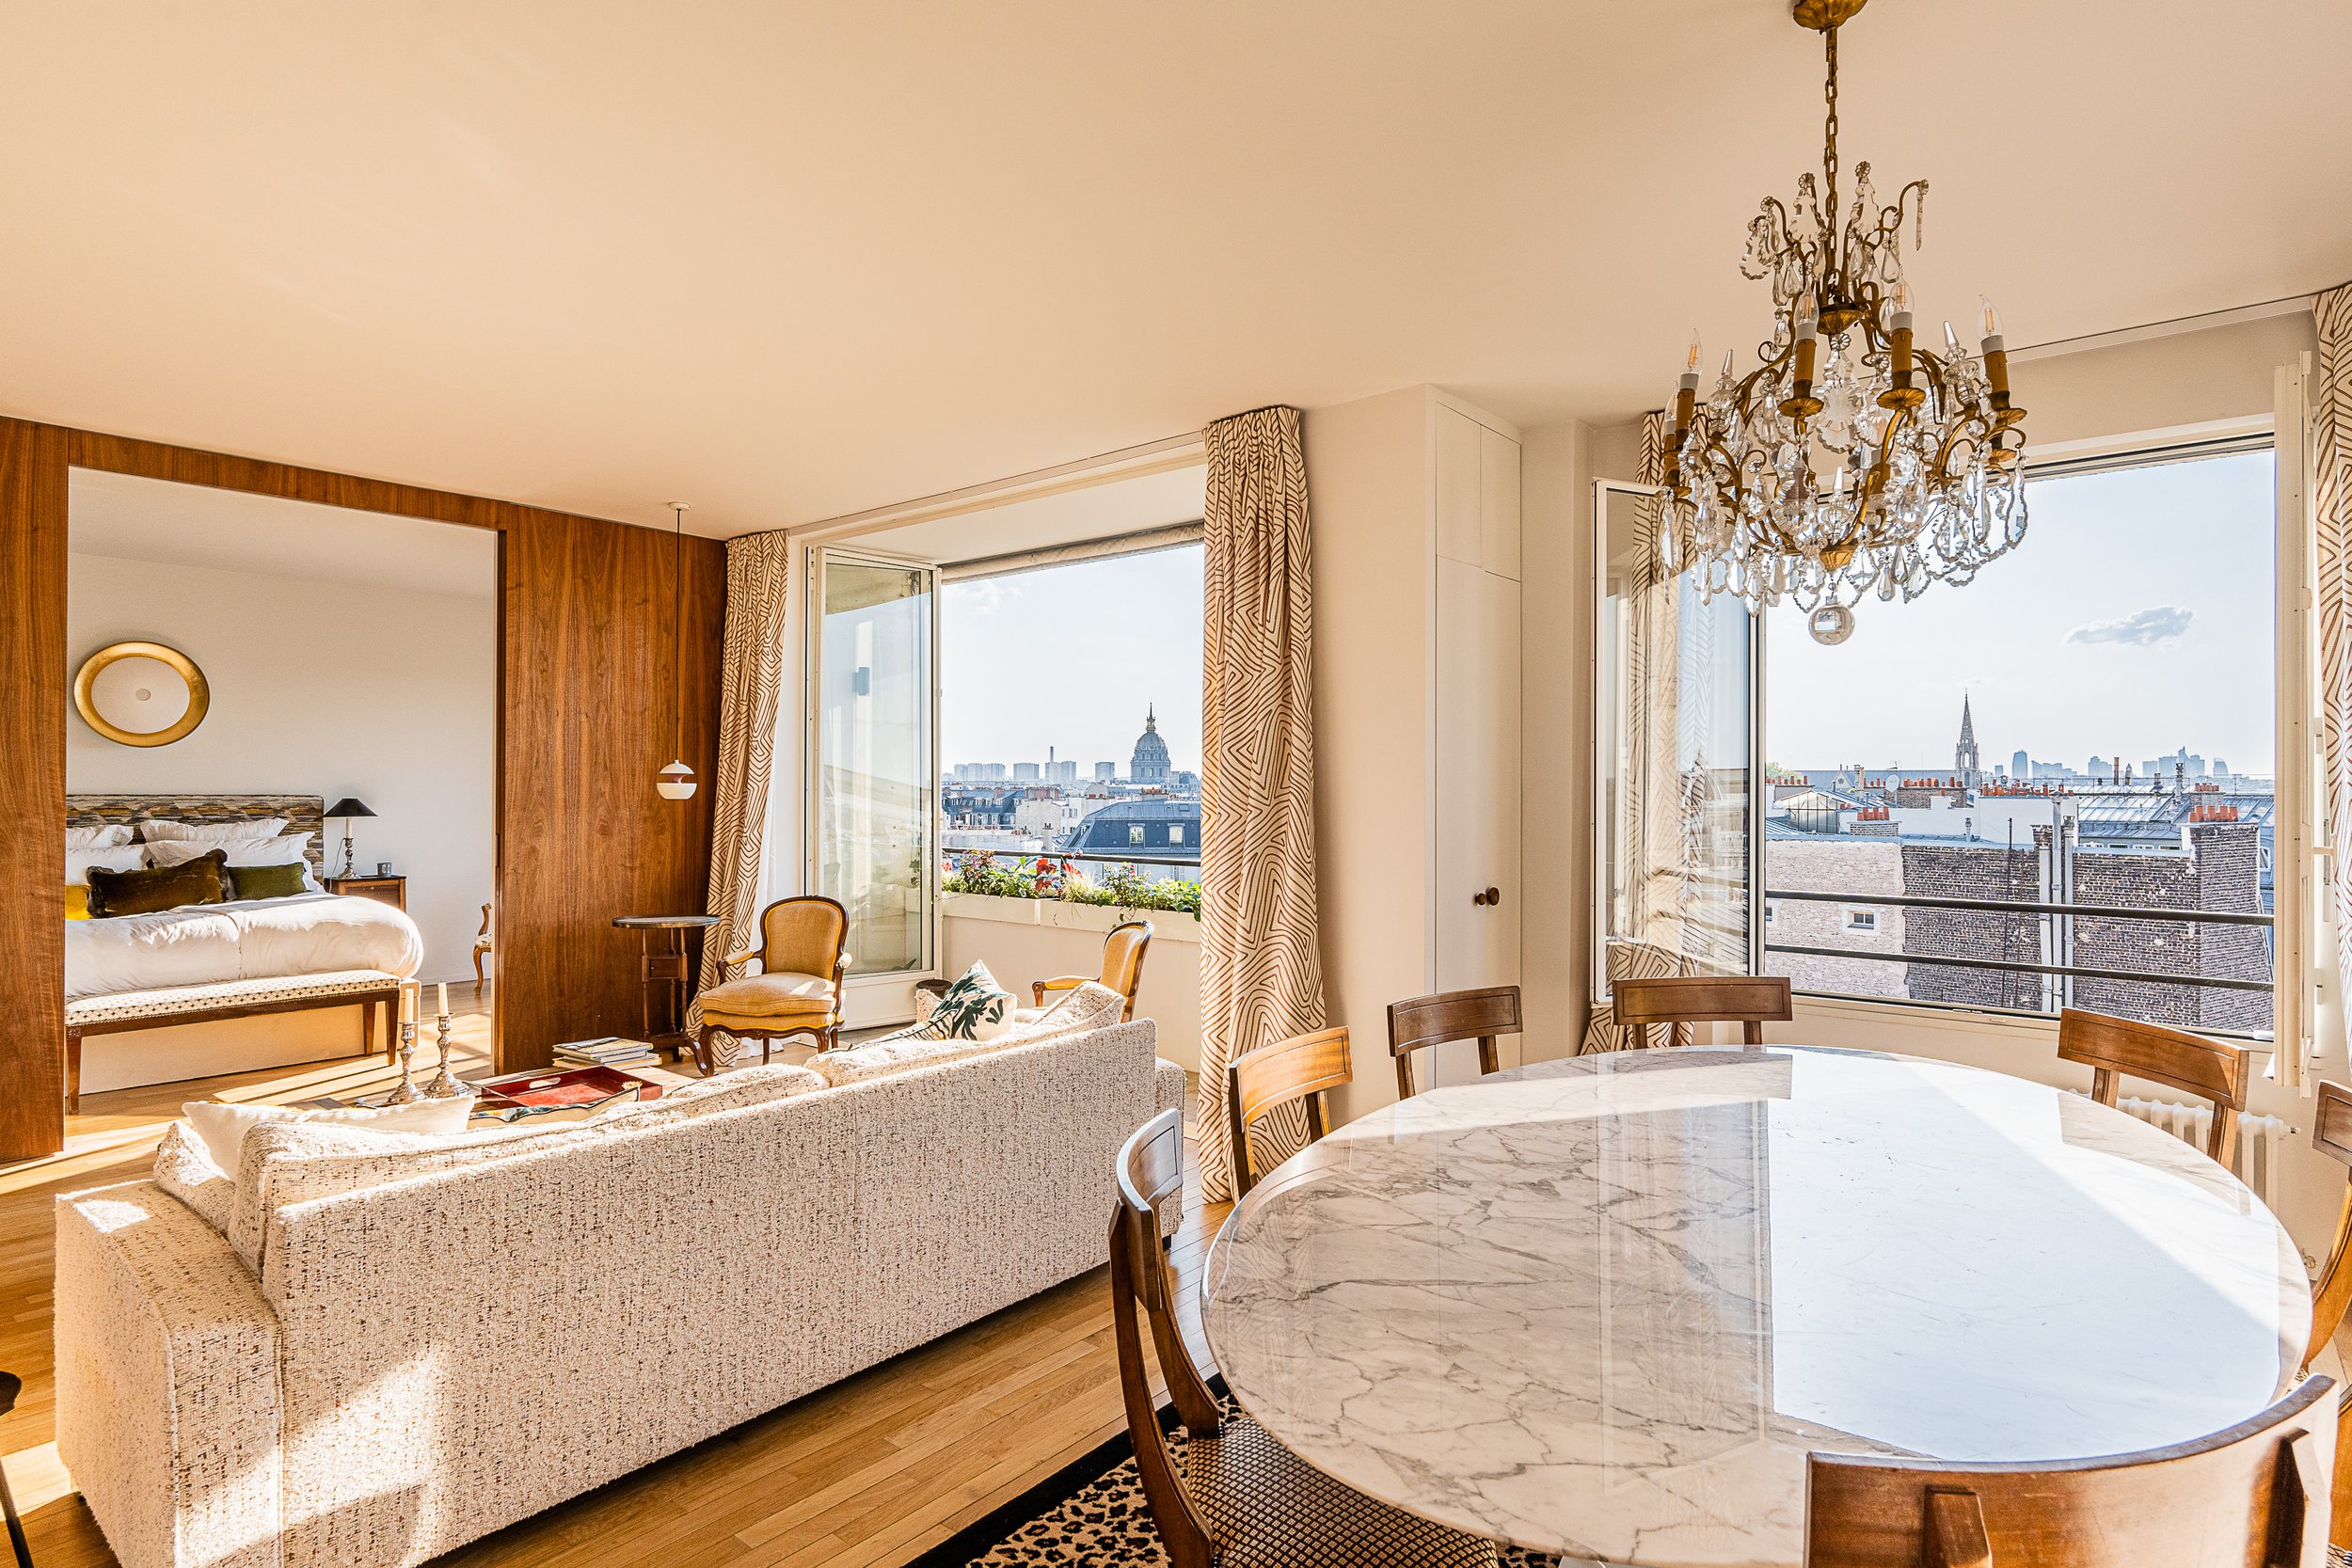 Prestigious apartment and rooftop in the heart of Paris and Saint Germain des Prés overlooking the Eiffel Tower